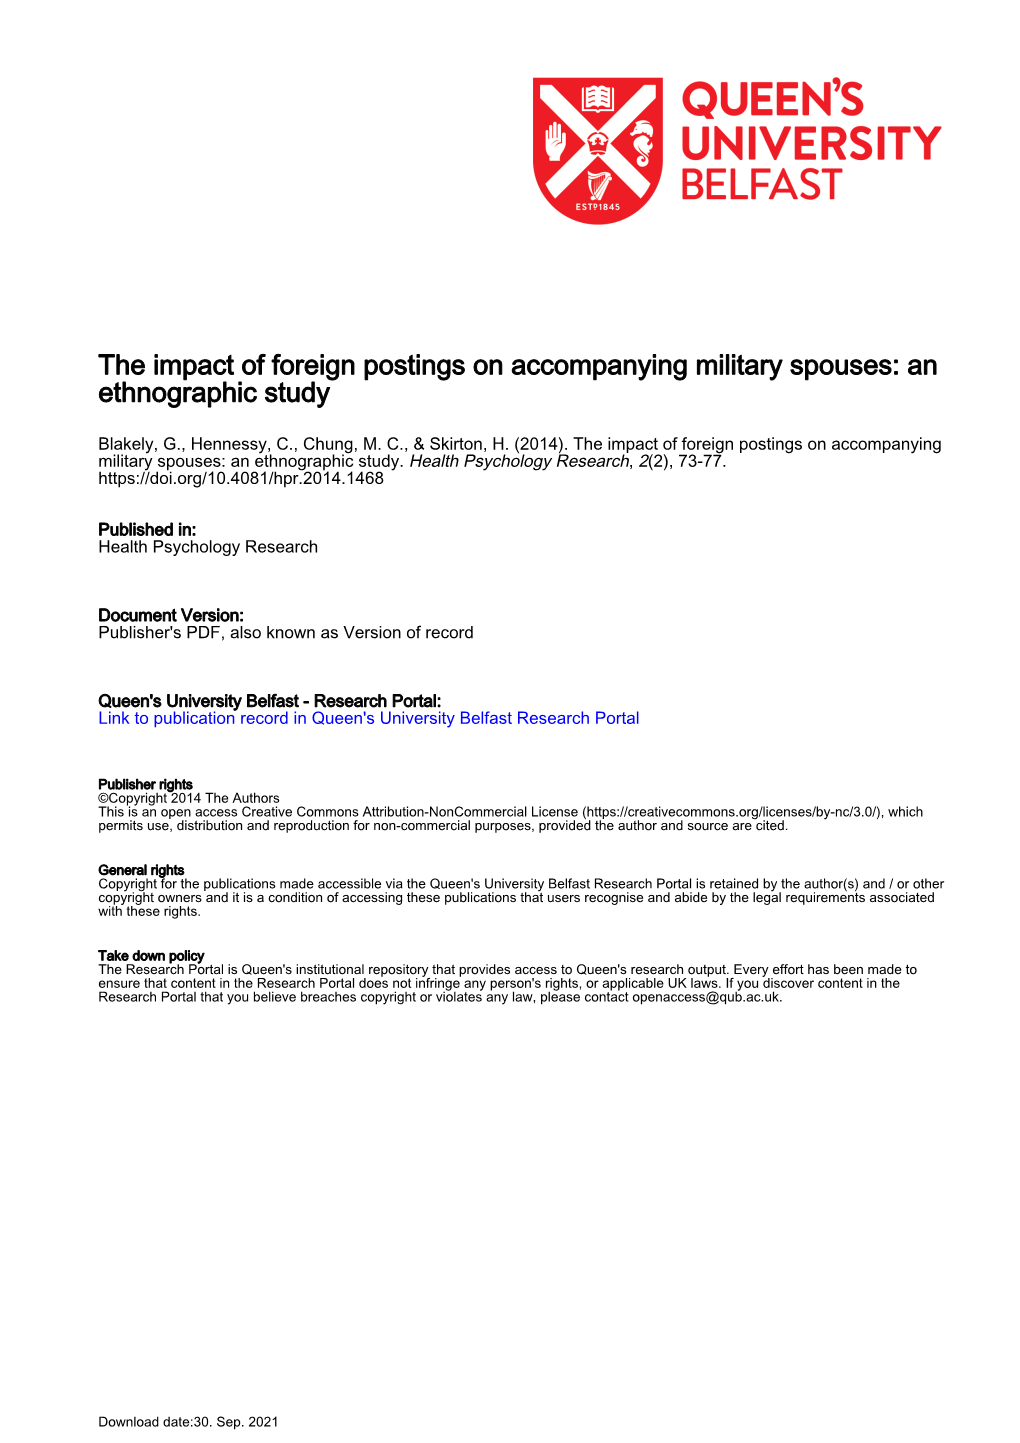 The Impact of Foreign Postings on Accompanying Military Spouses: an Ethnographic Study